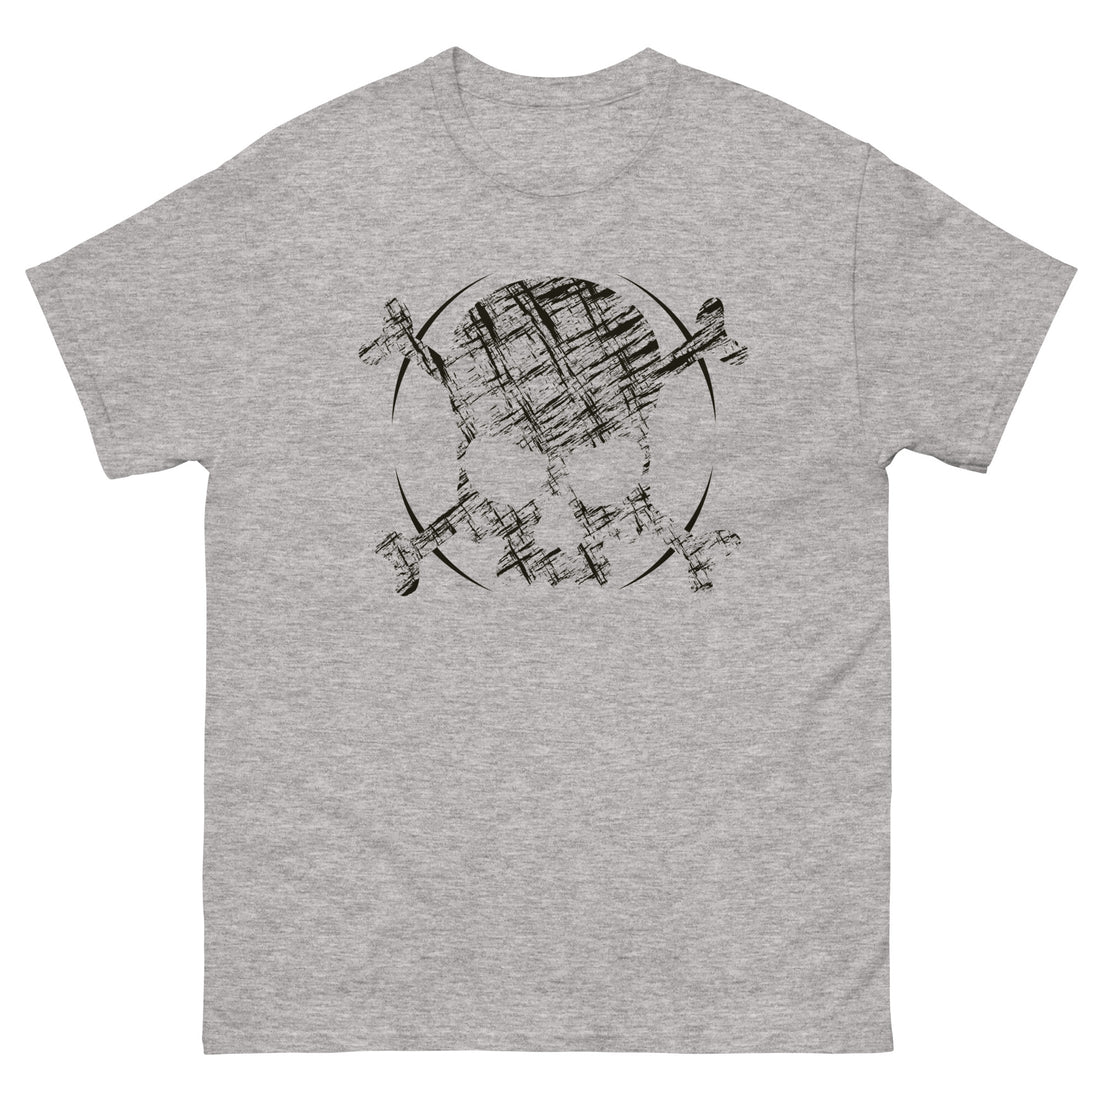 A light grey t-shirt adorned with a roughly cross-hatched skull and crossbones in black.  Solid black arcs give the image the impression of movement towards the end of the crossbones.